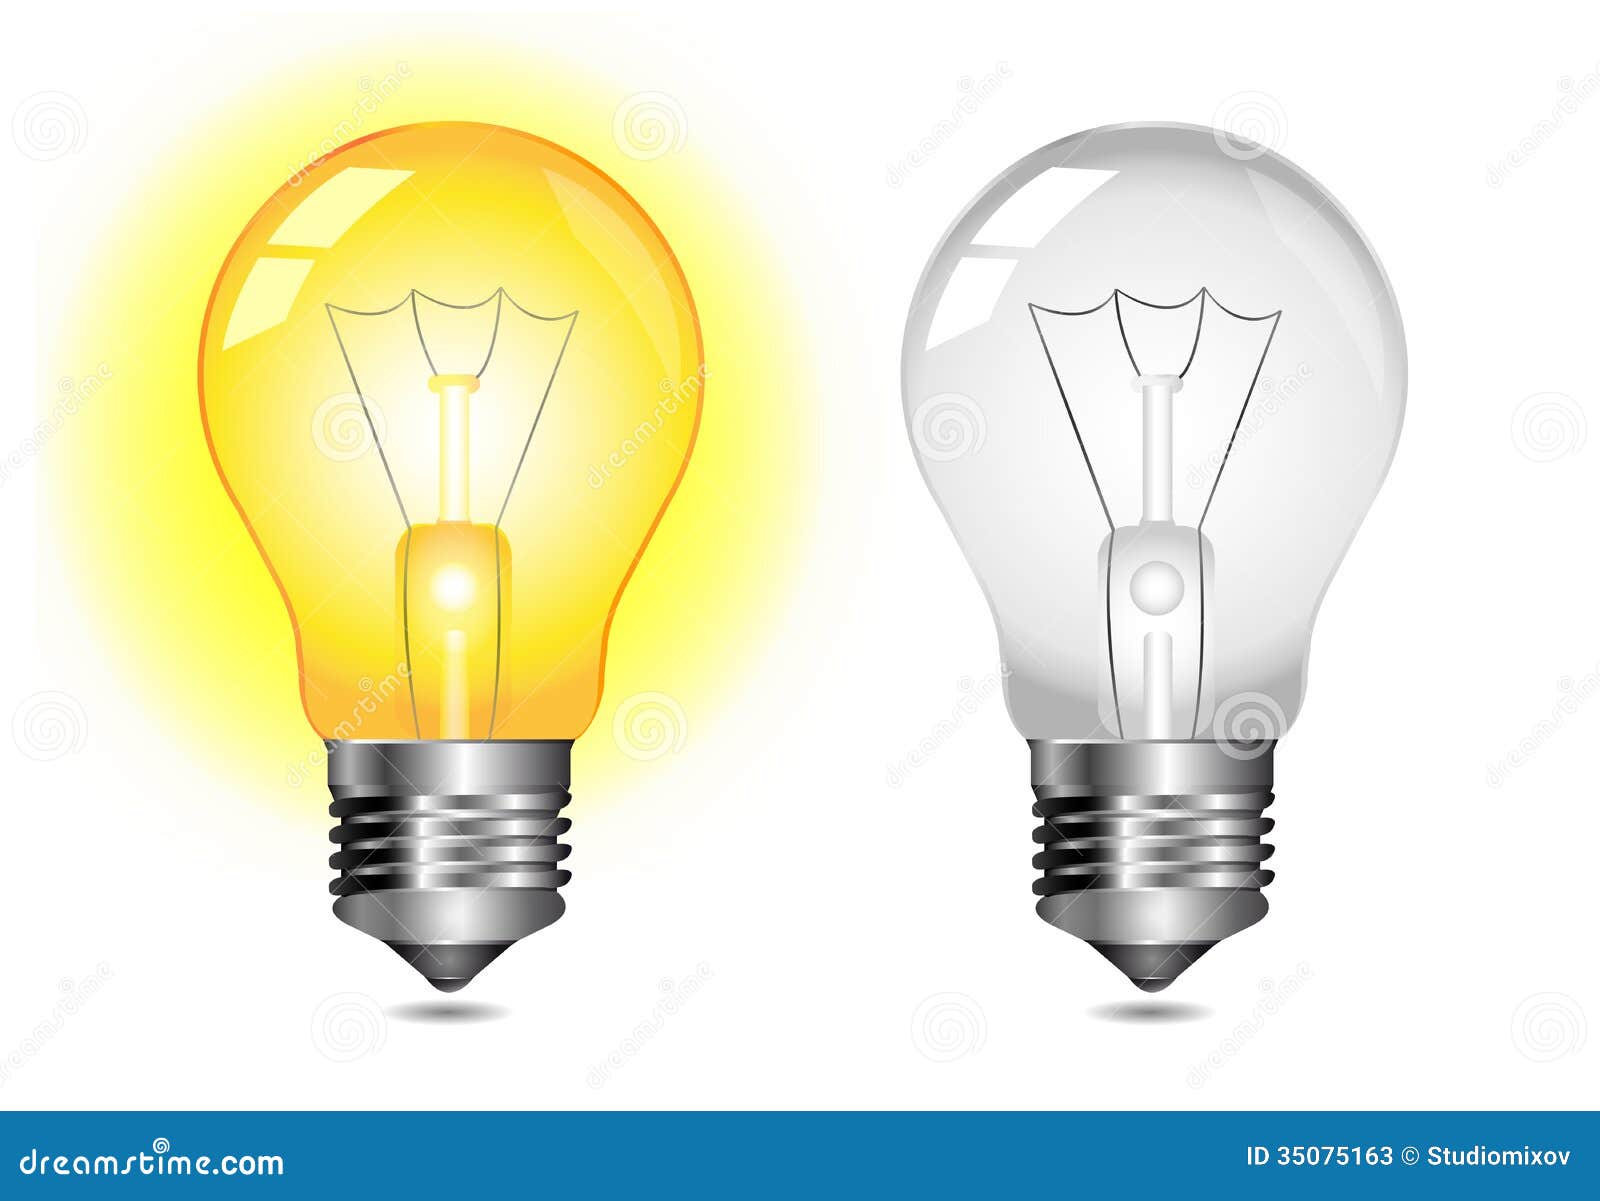 glowing light bulb icon - on / off